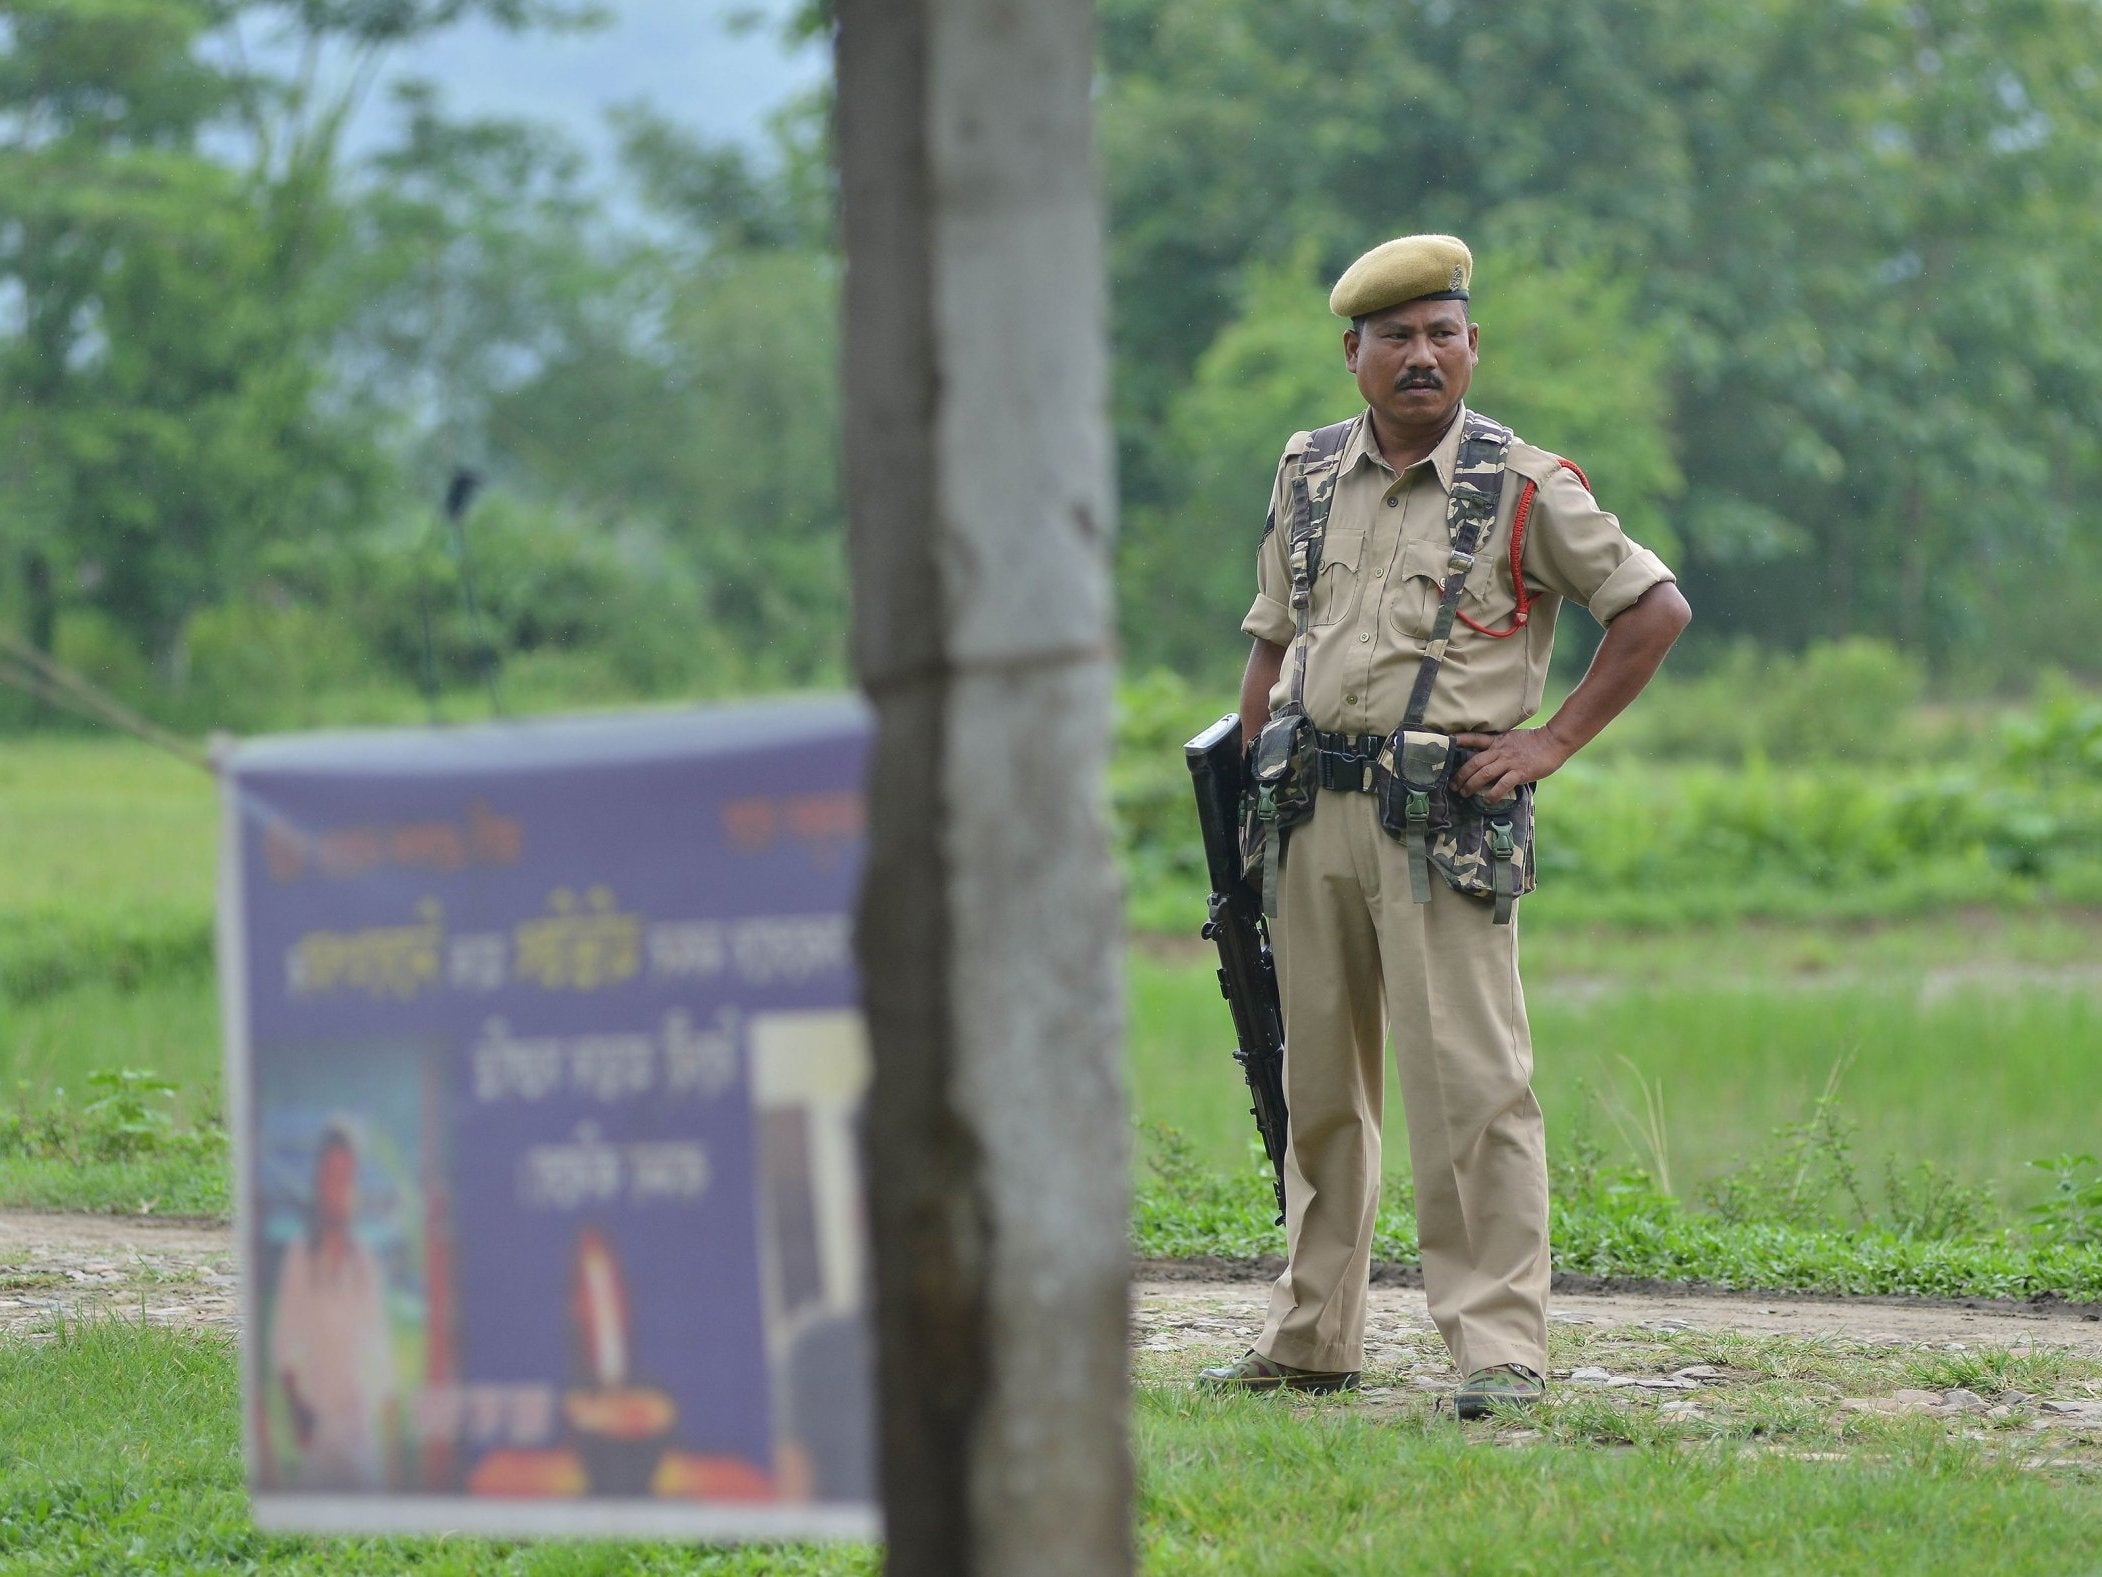 Indian security personnel near the site of the lynching of two men in Panjuri Kachari village, sparked by rumours spread on Facebook and WhatsApp in India, 10 July